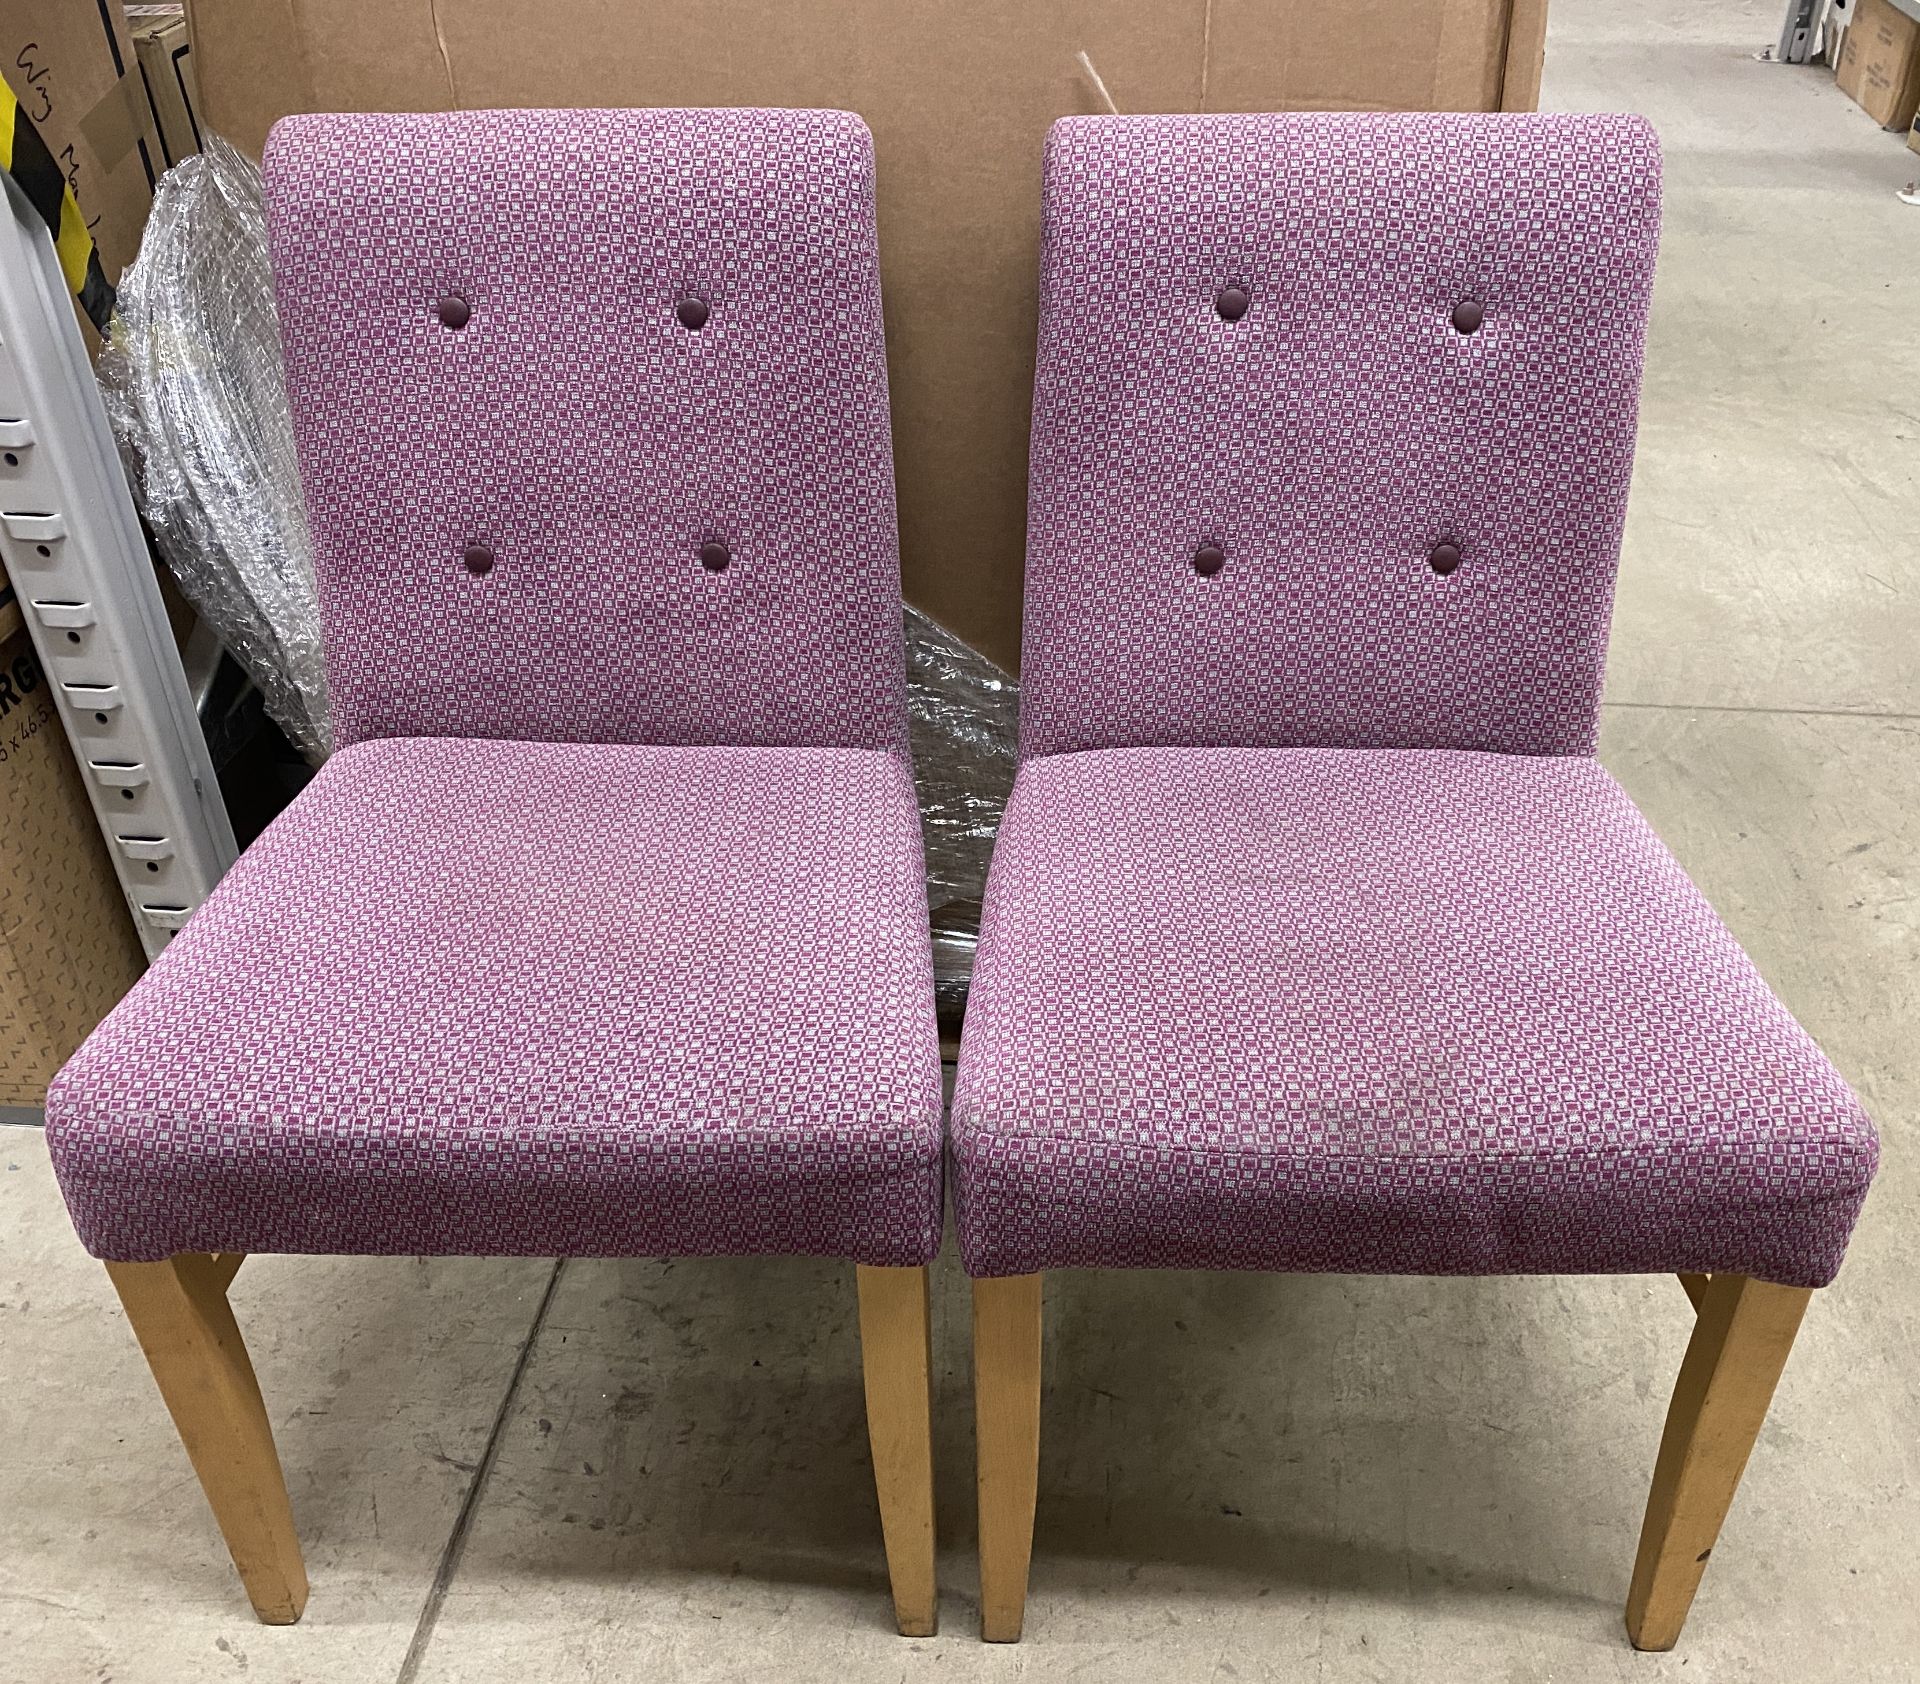 4 x Wooden Framed Rolled Backed Purple Patterned Upholstered Dining Chairs with Purple Leather